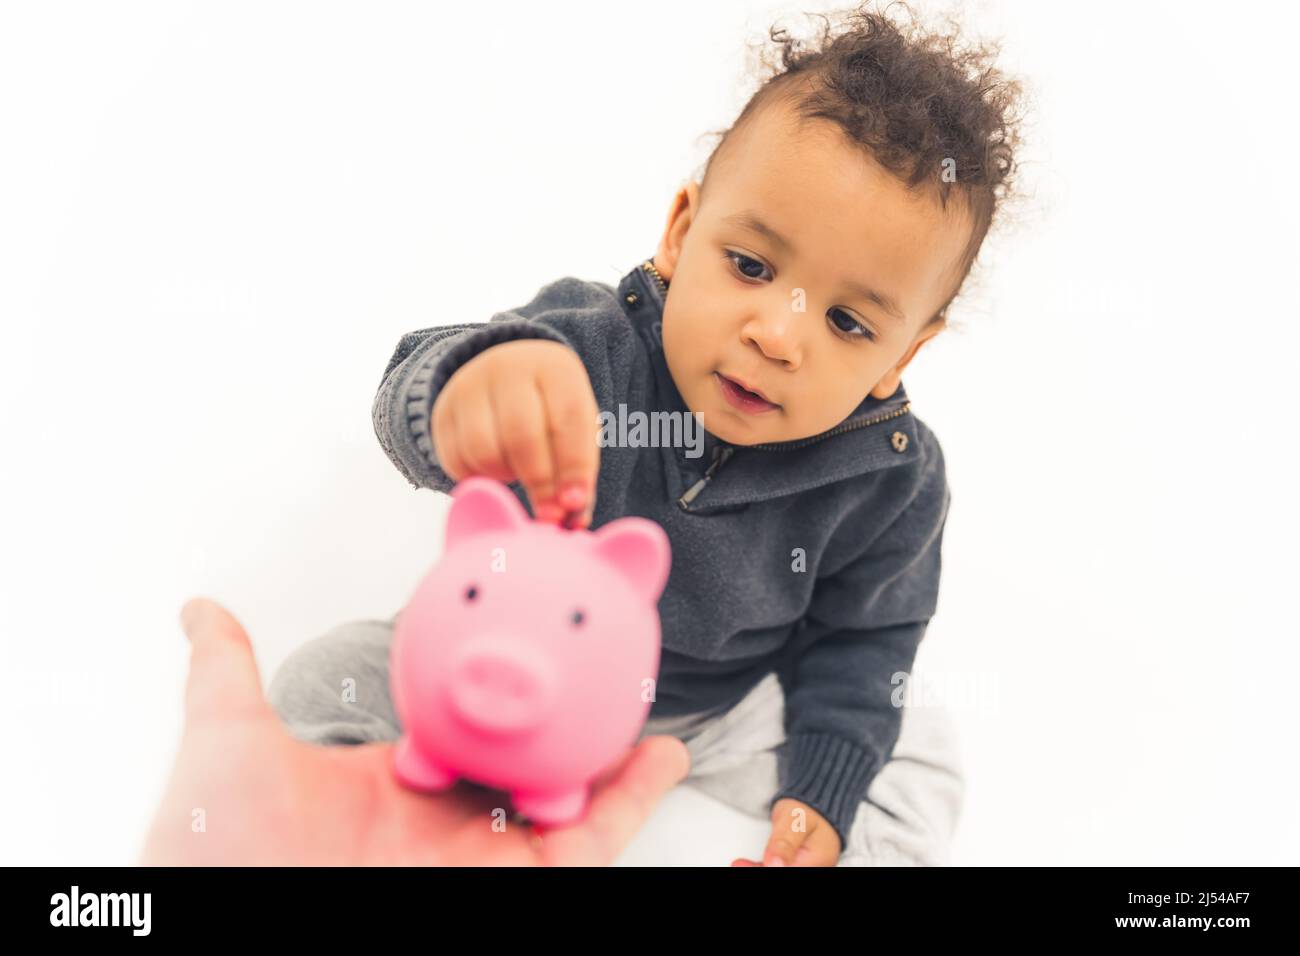 Cheerful toddler putting coin into the piggy bank. High quality photo Stock Photo